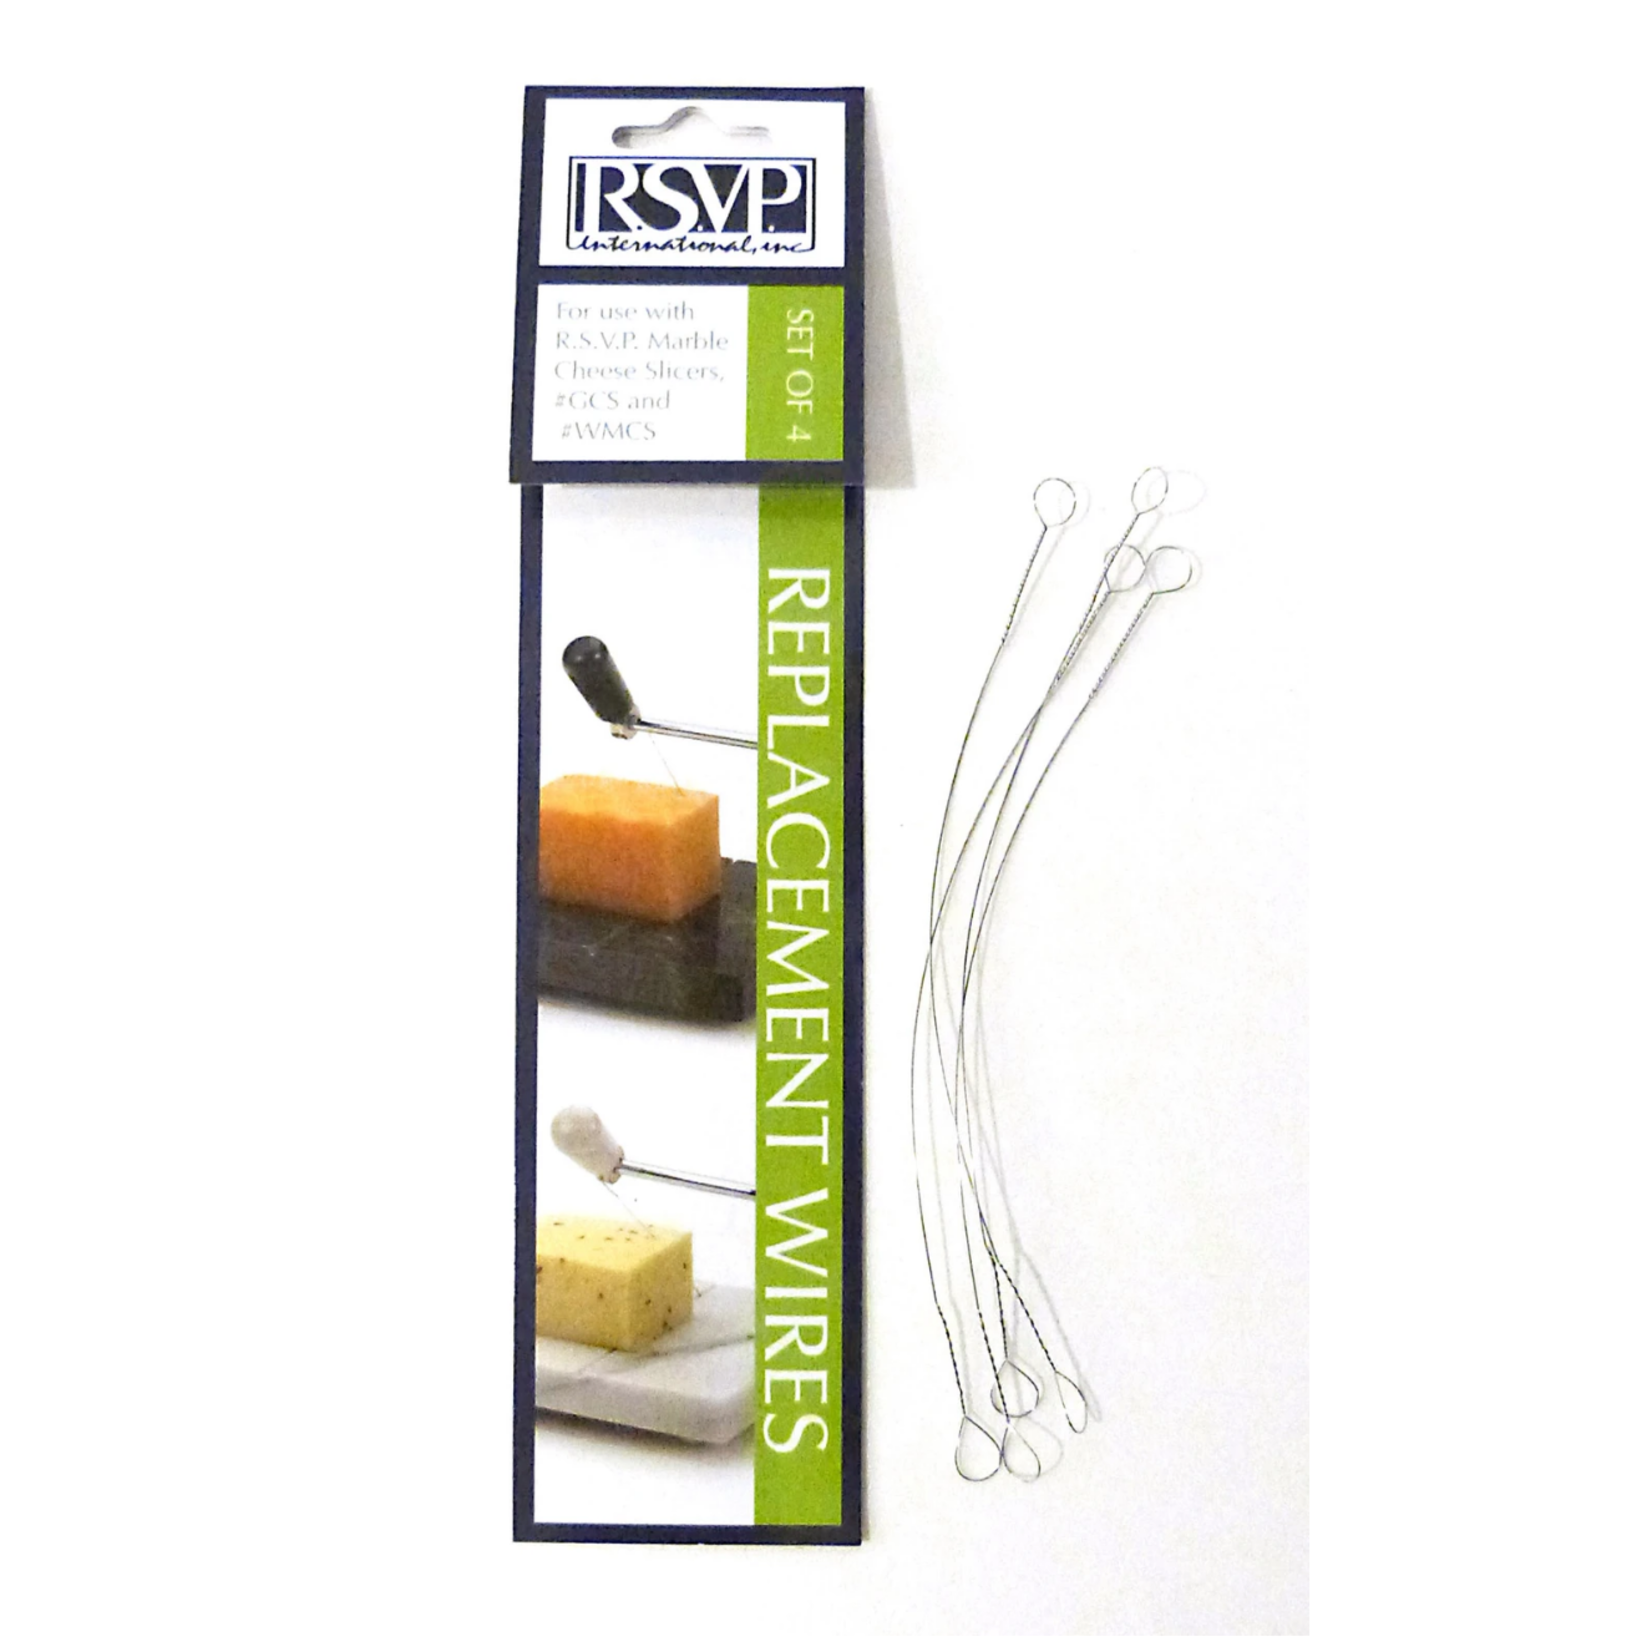 RSVP Cheese Slicer Replacement Wire